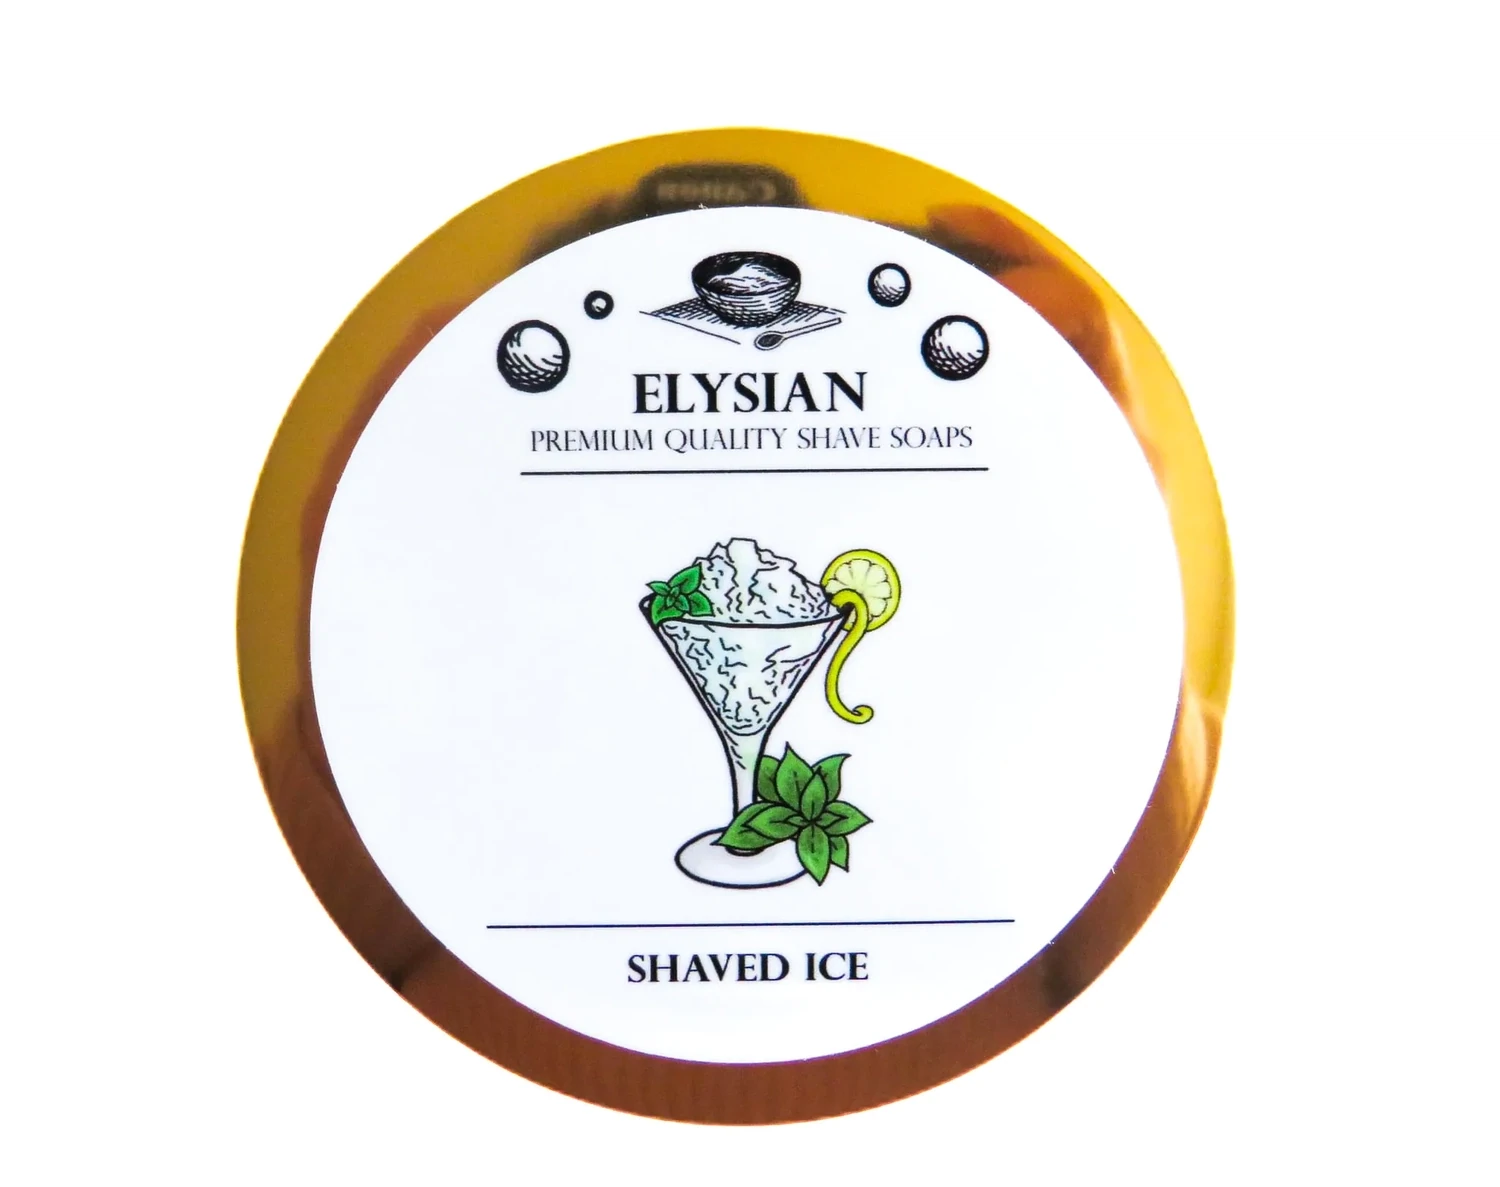 Elysian Soap Shaved Ice Artisan Shave Soap